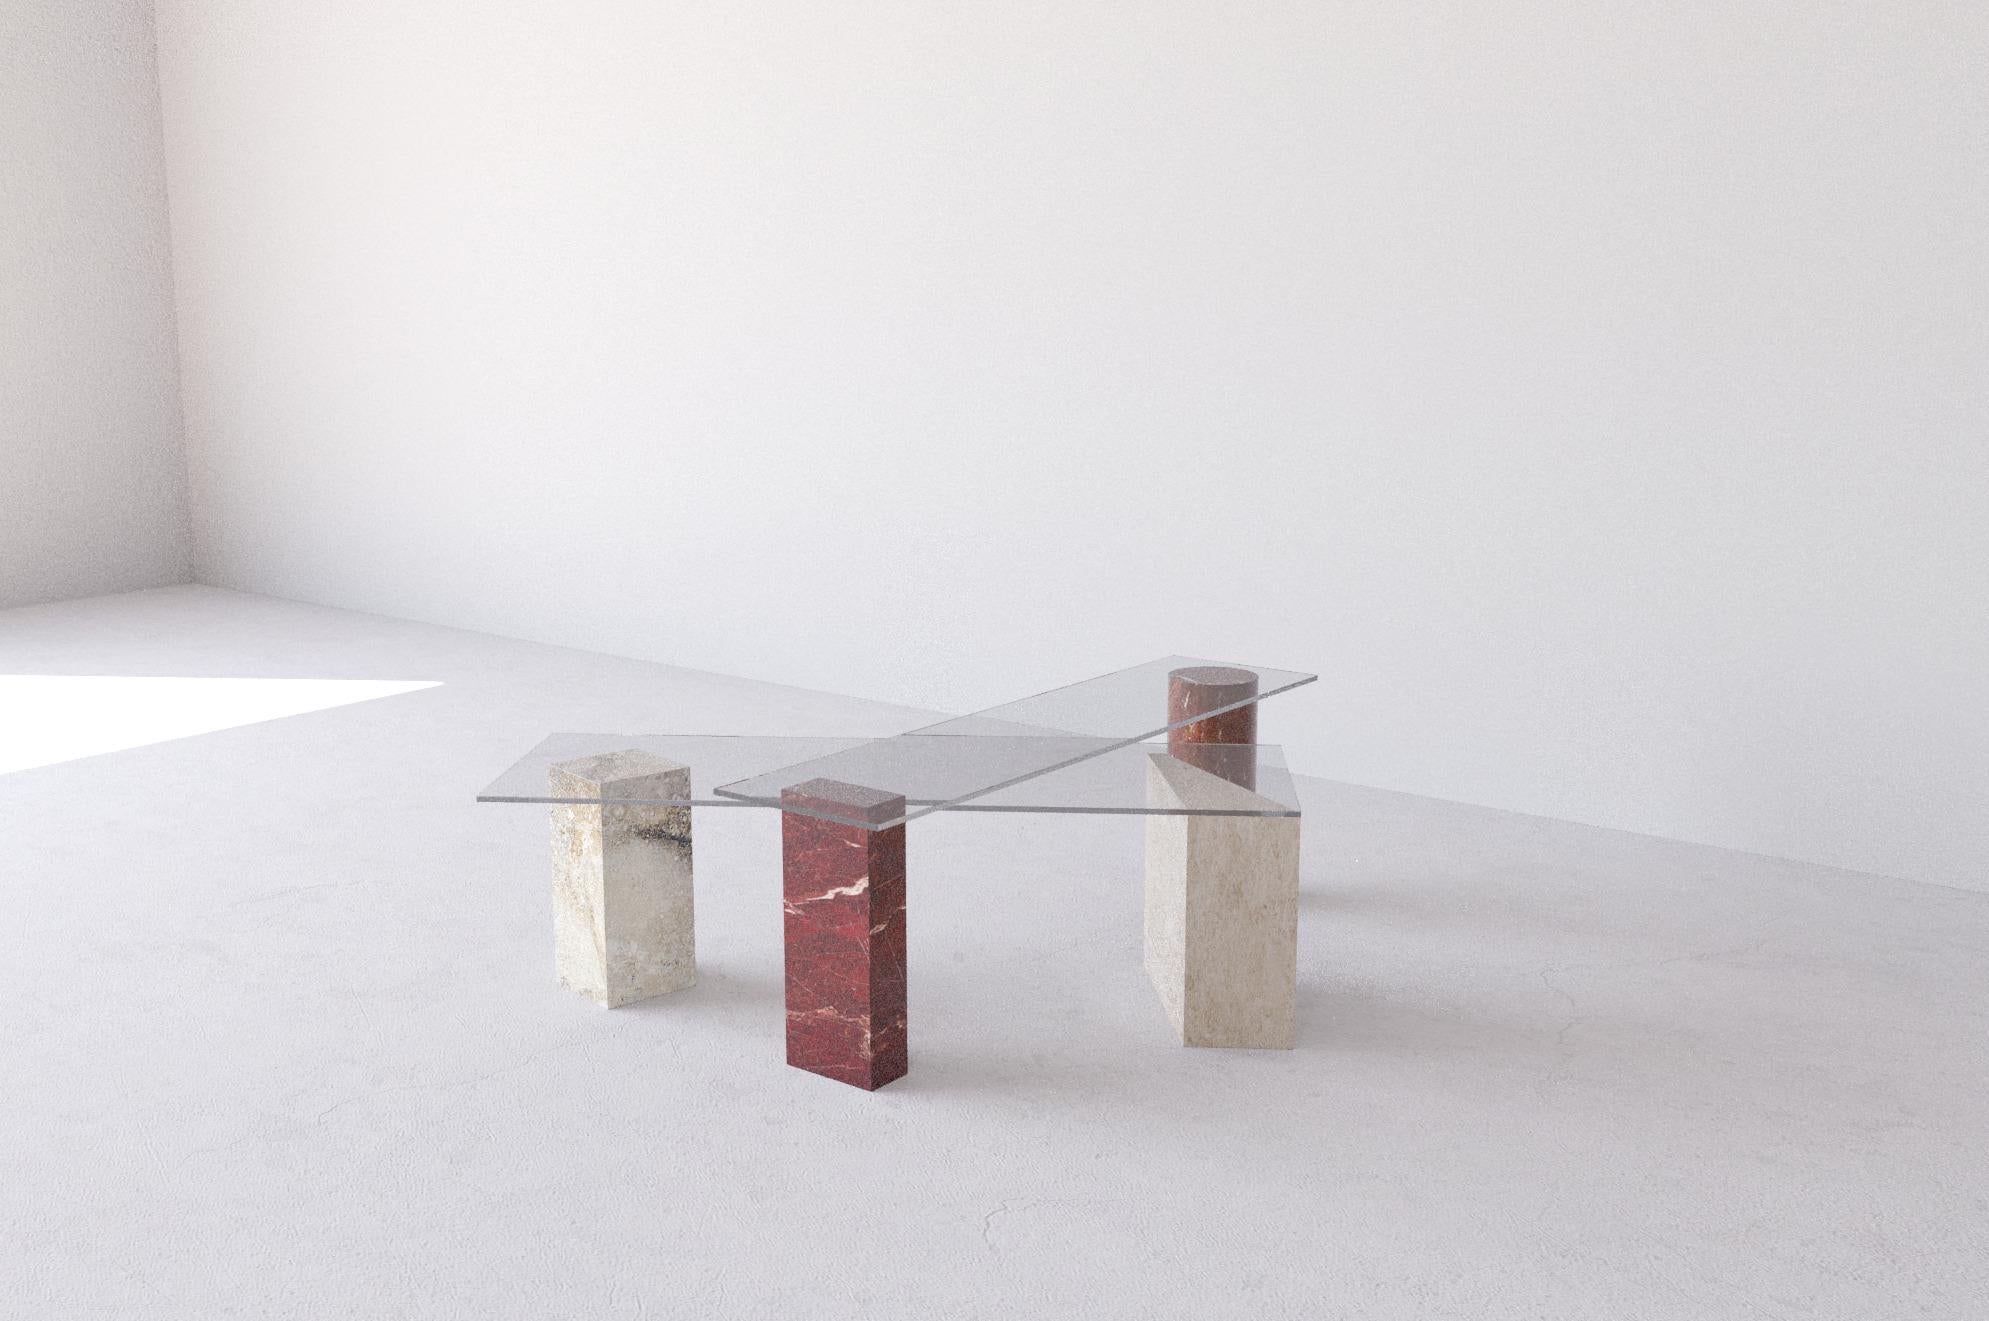 Post M table by Morgane Avéus
Dimensions: Part 1: W 120 x D 25 x H 45 cm.
Part 2: W 120 x D 37 x H 35 cm.
Materials: Clear glass, stone. 

Various stones available.

Post M Table low table is a combination of two console-like elements that are